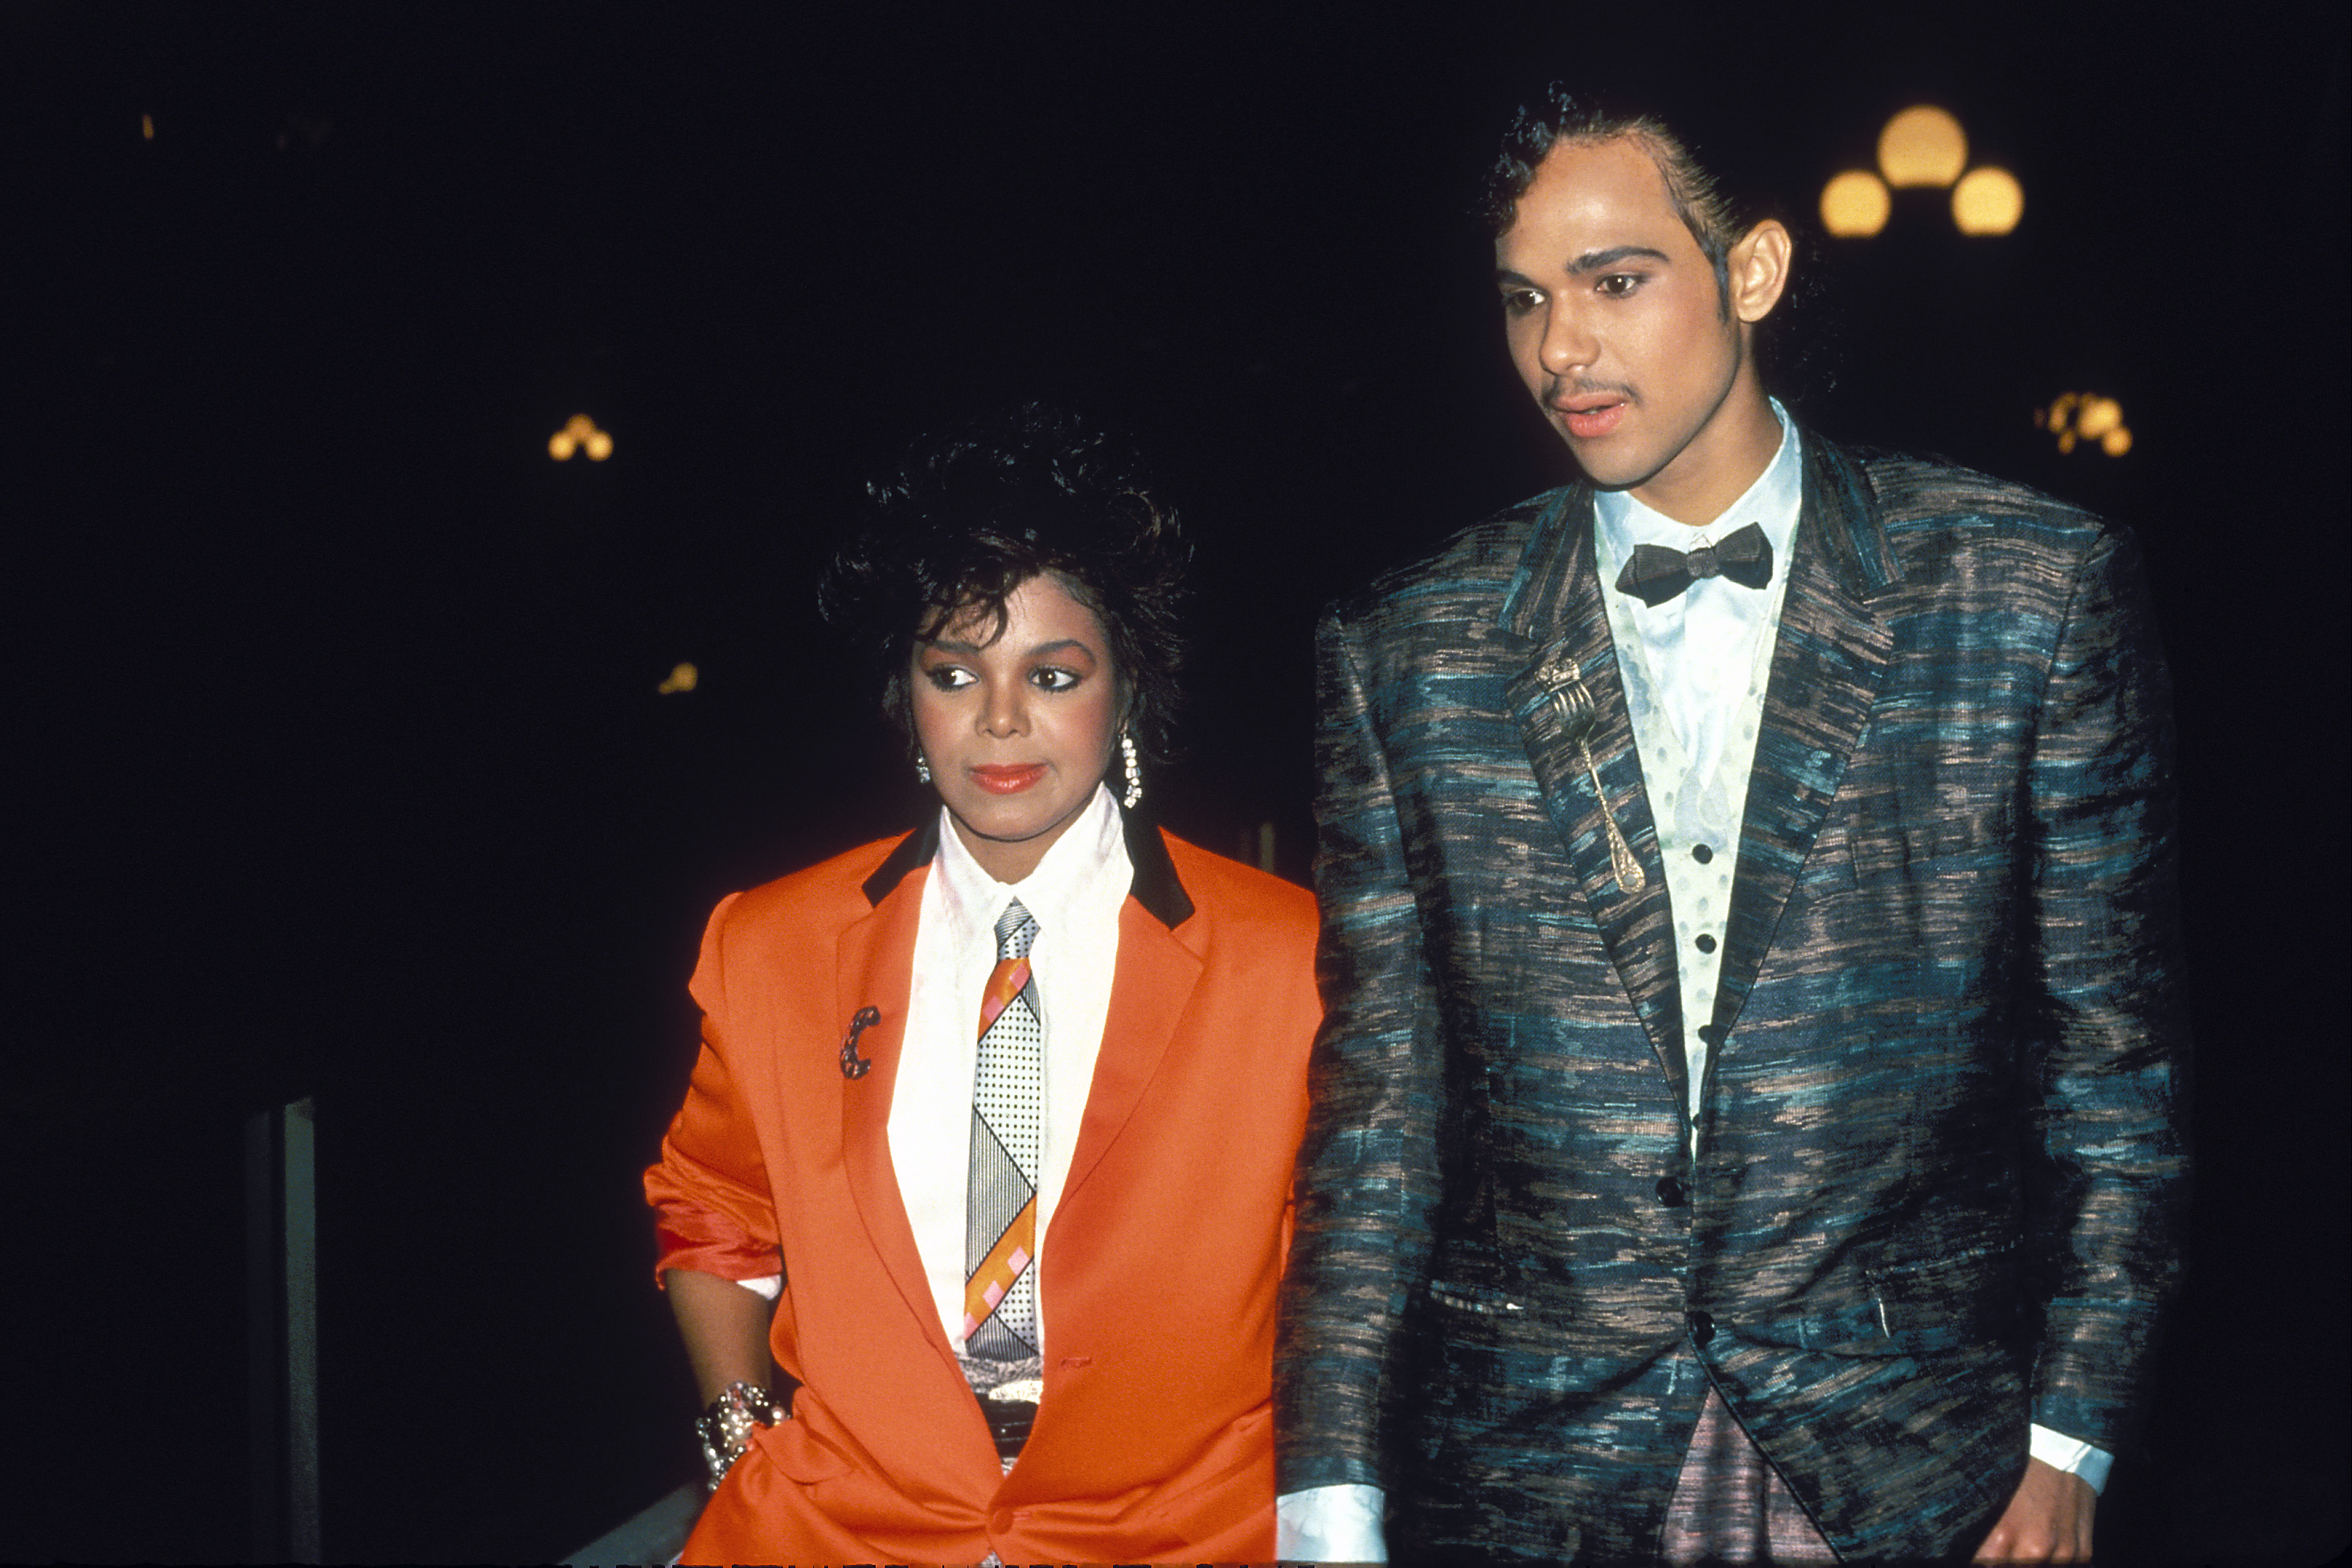 Janet Jackson with James DeBarge in 1984